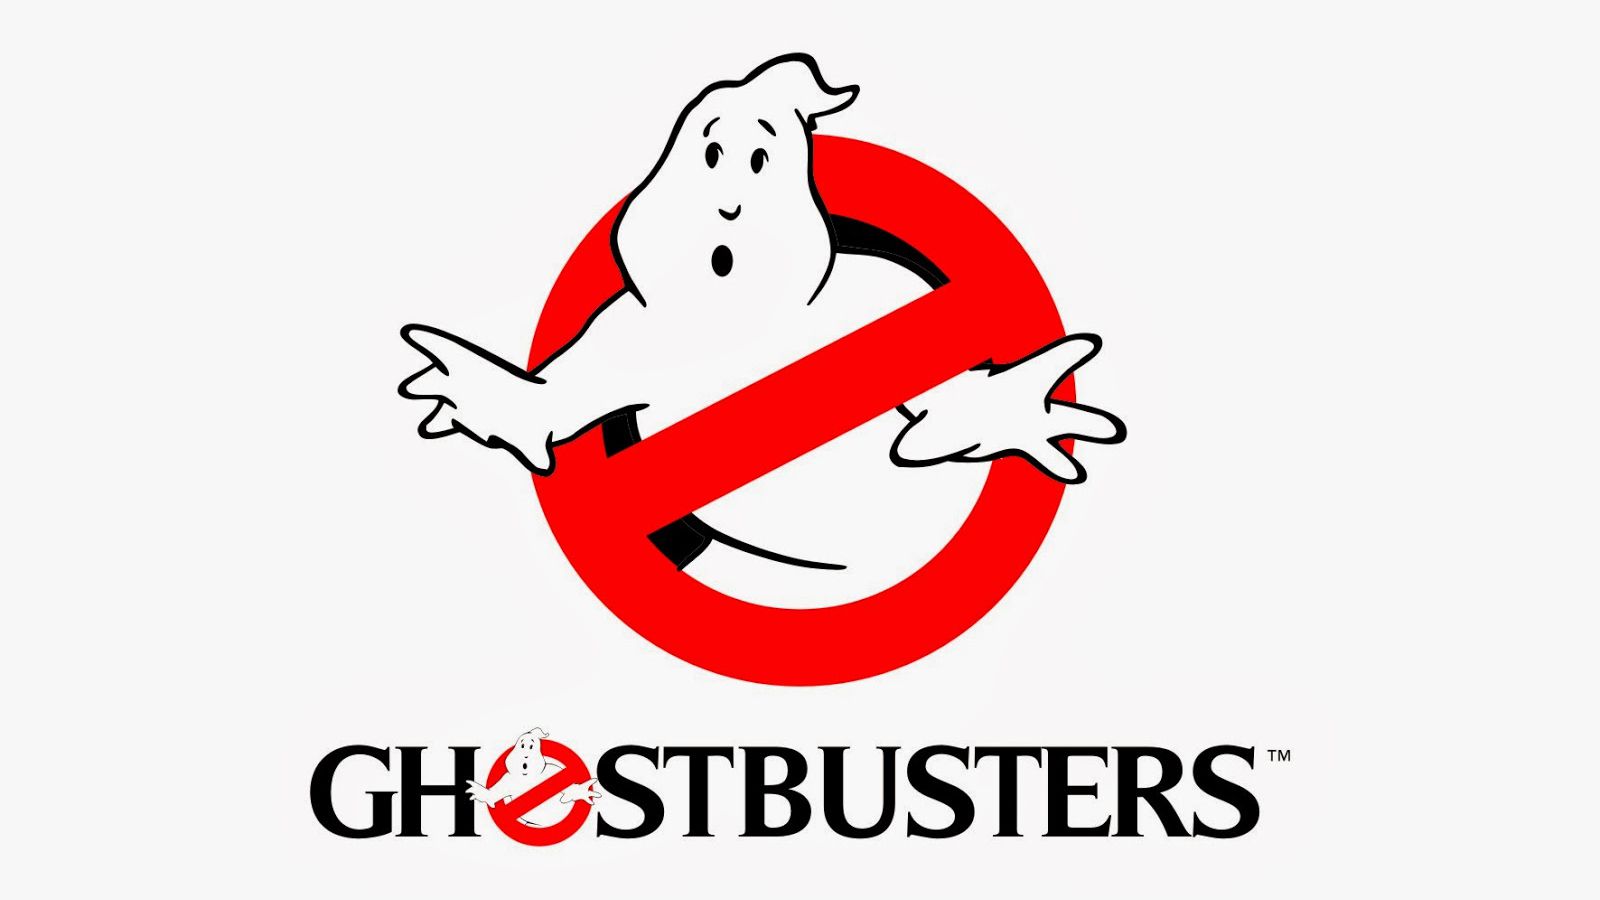 Ghostbusters franchise in the works, second movie to feature dudes